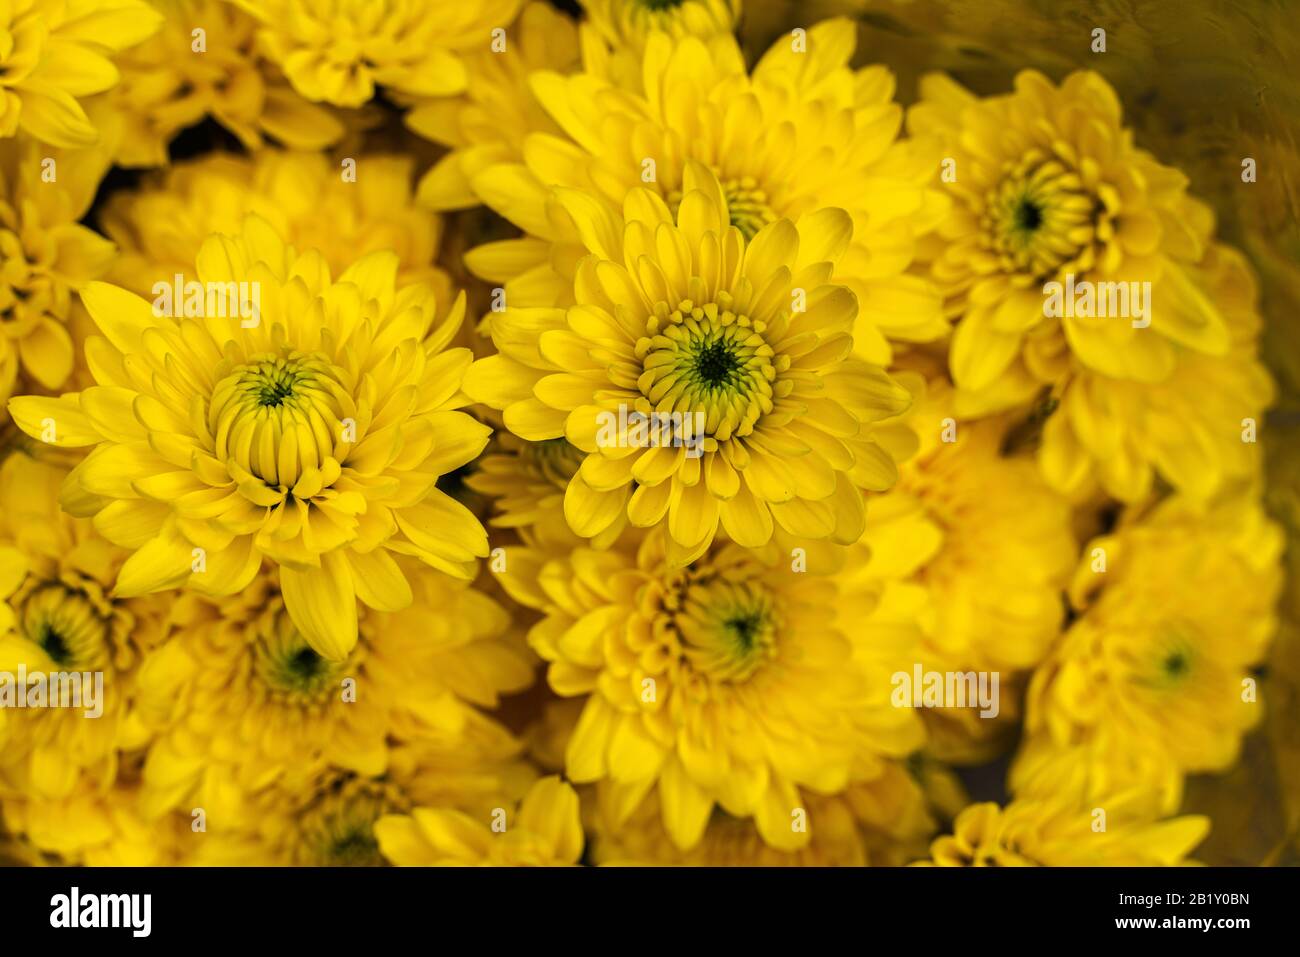 Bouquet of Chrysanthemums, Chrysanthemum indicum, yellow; the chrysanthemum is a species belonging to the Asteraceae family. Stock Photo